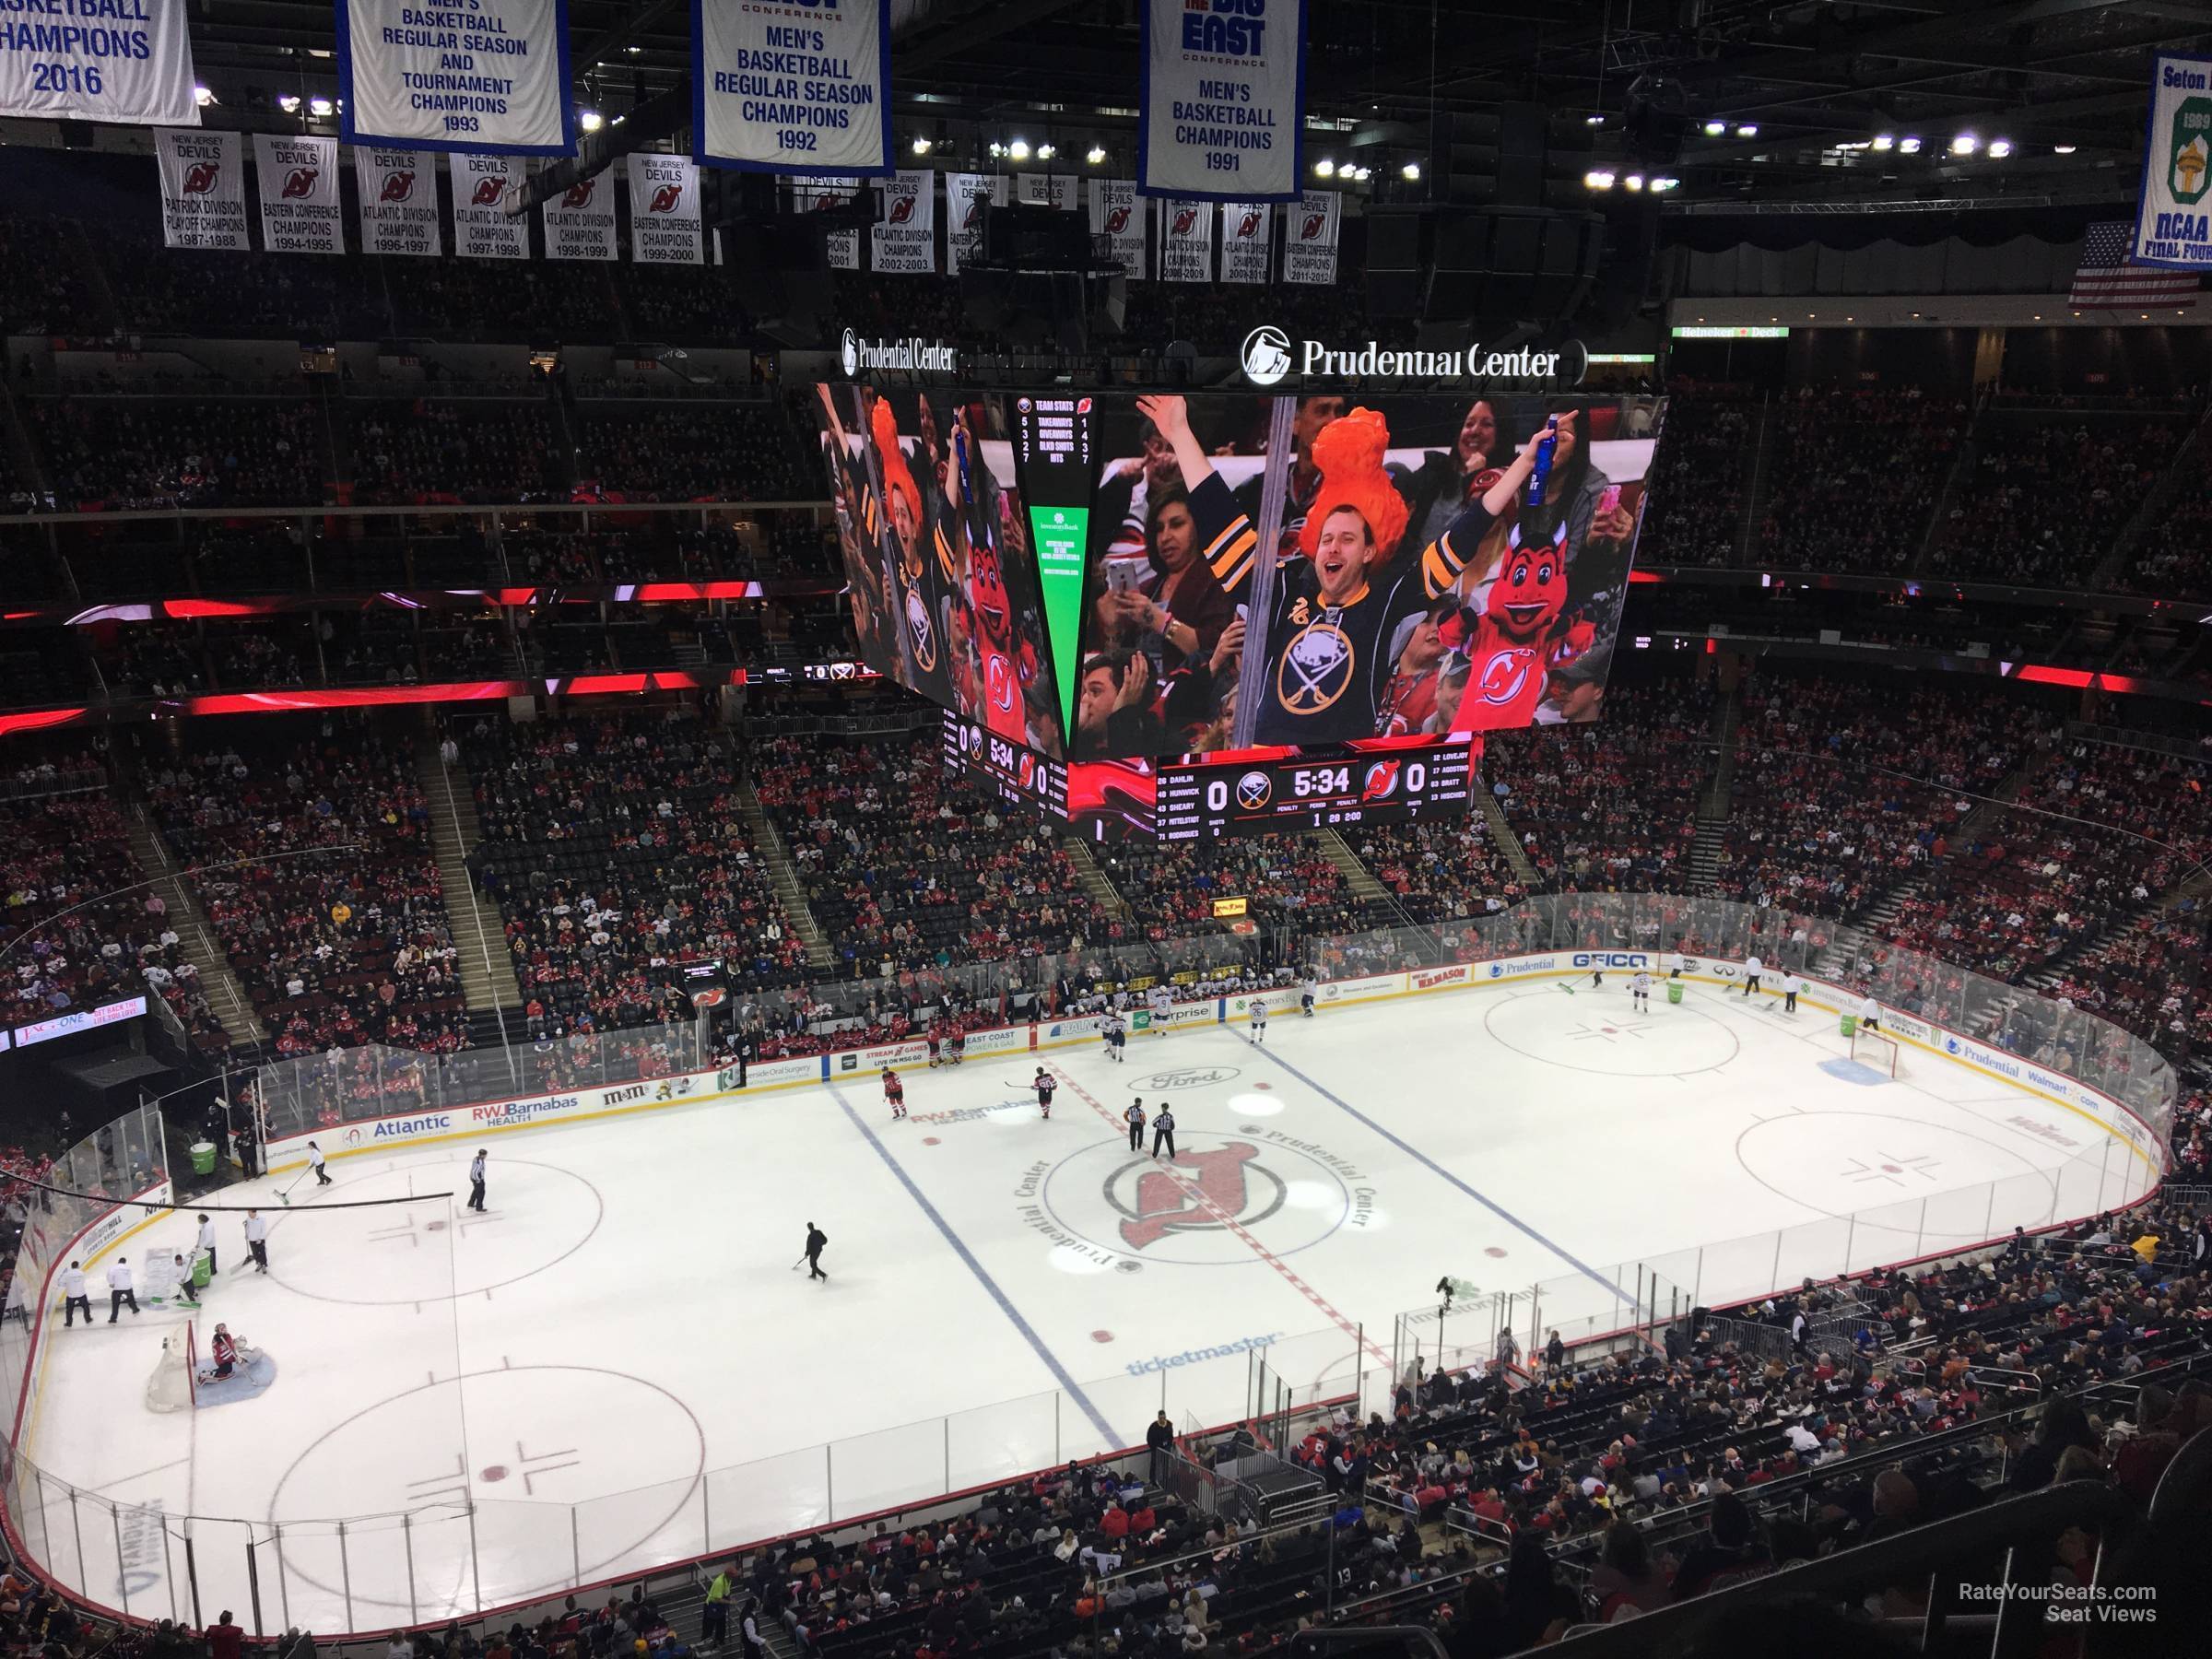 section 126, row 6 seat view  for hockey - prudential center